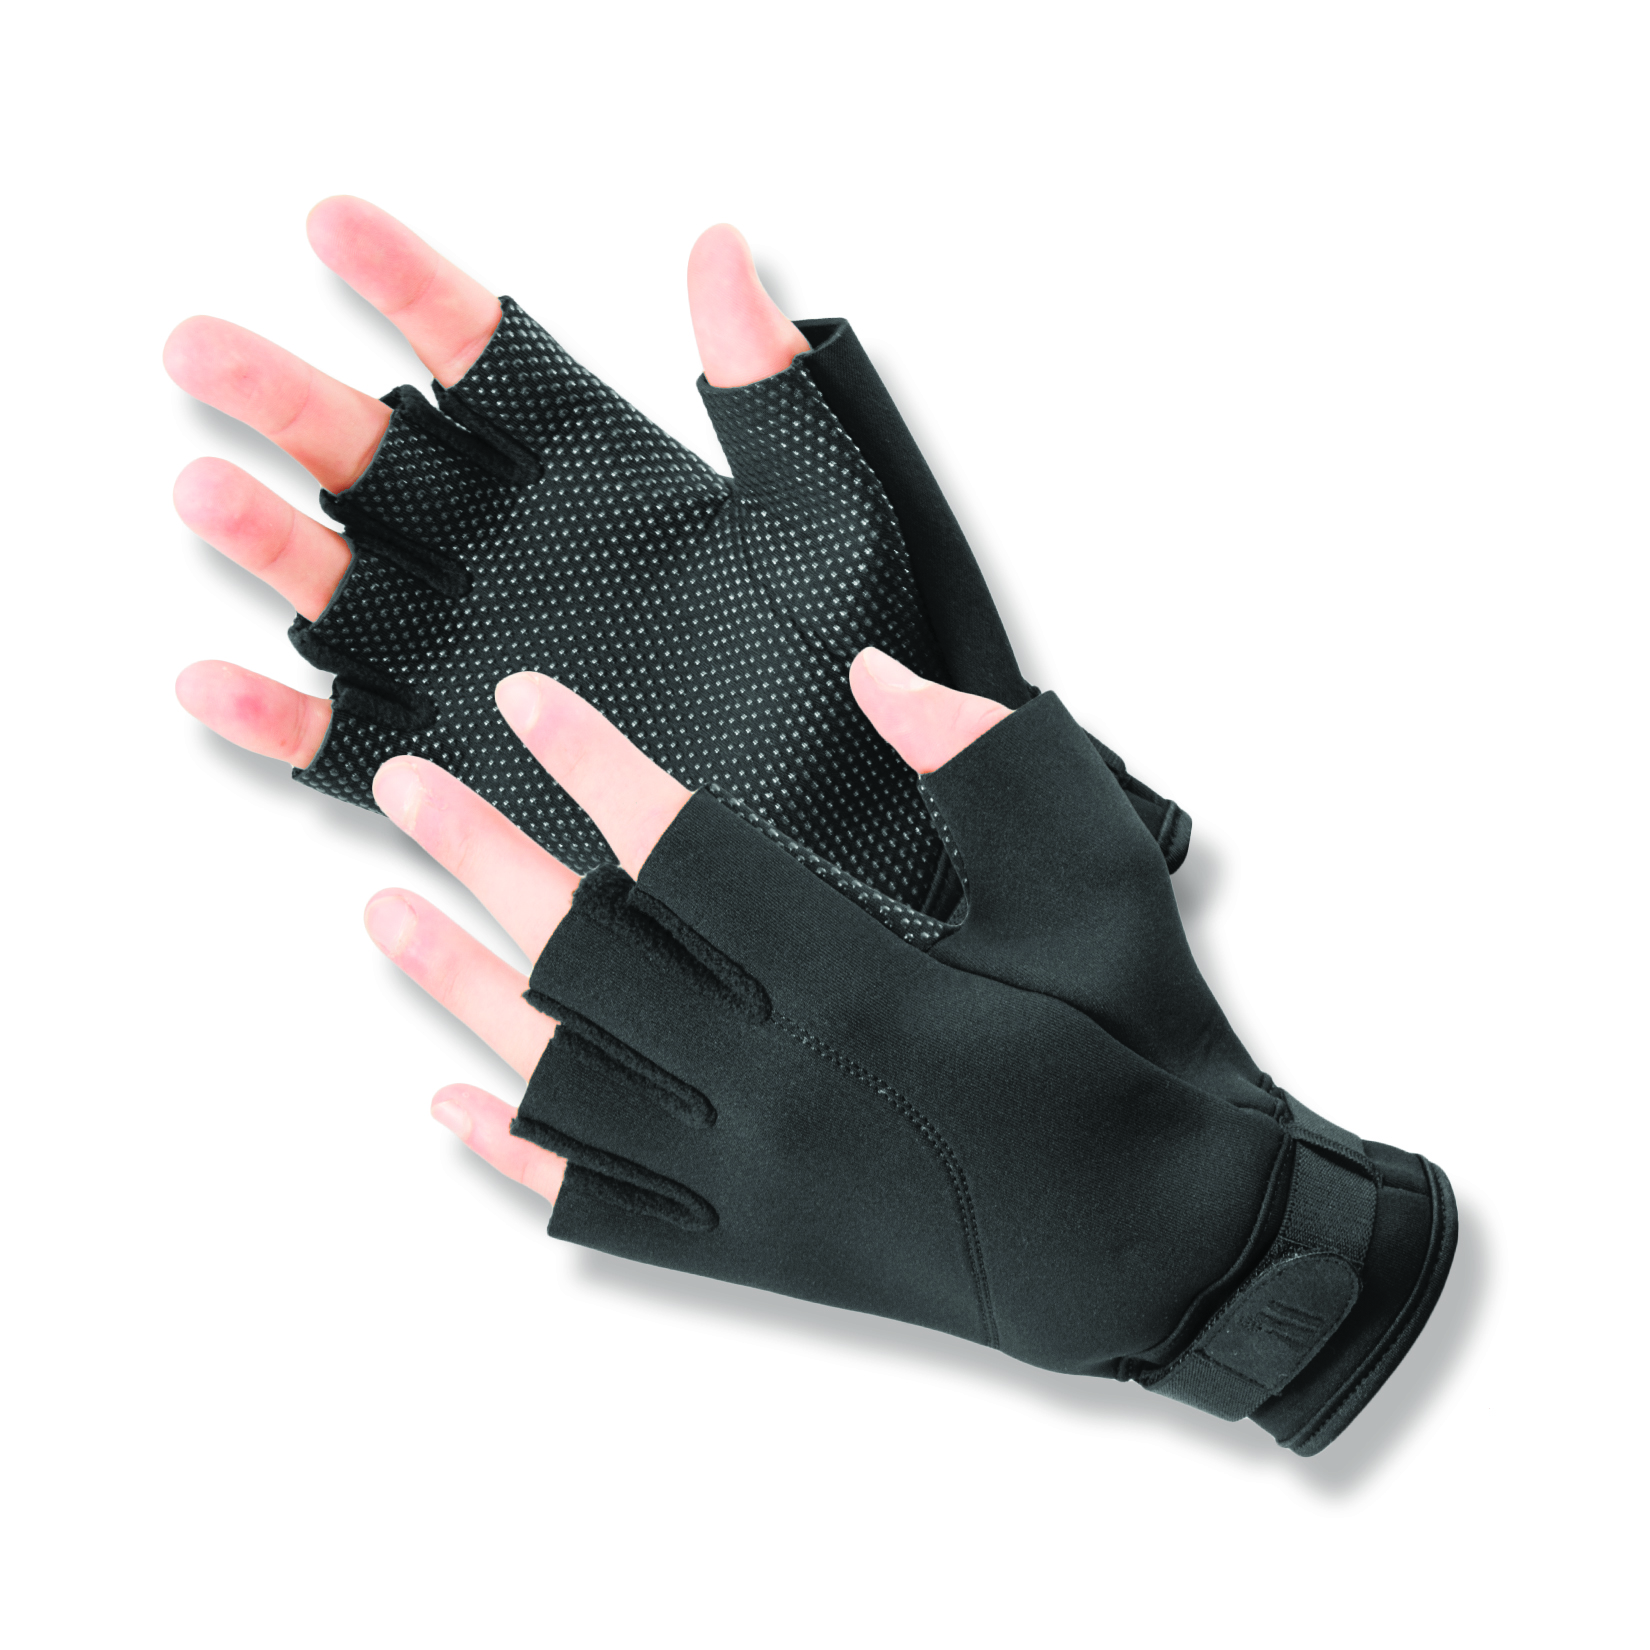 Expert Fin™ Cold Weather Open Finger Neoprene Gloves with gripper dots on the palms